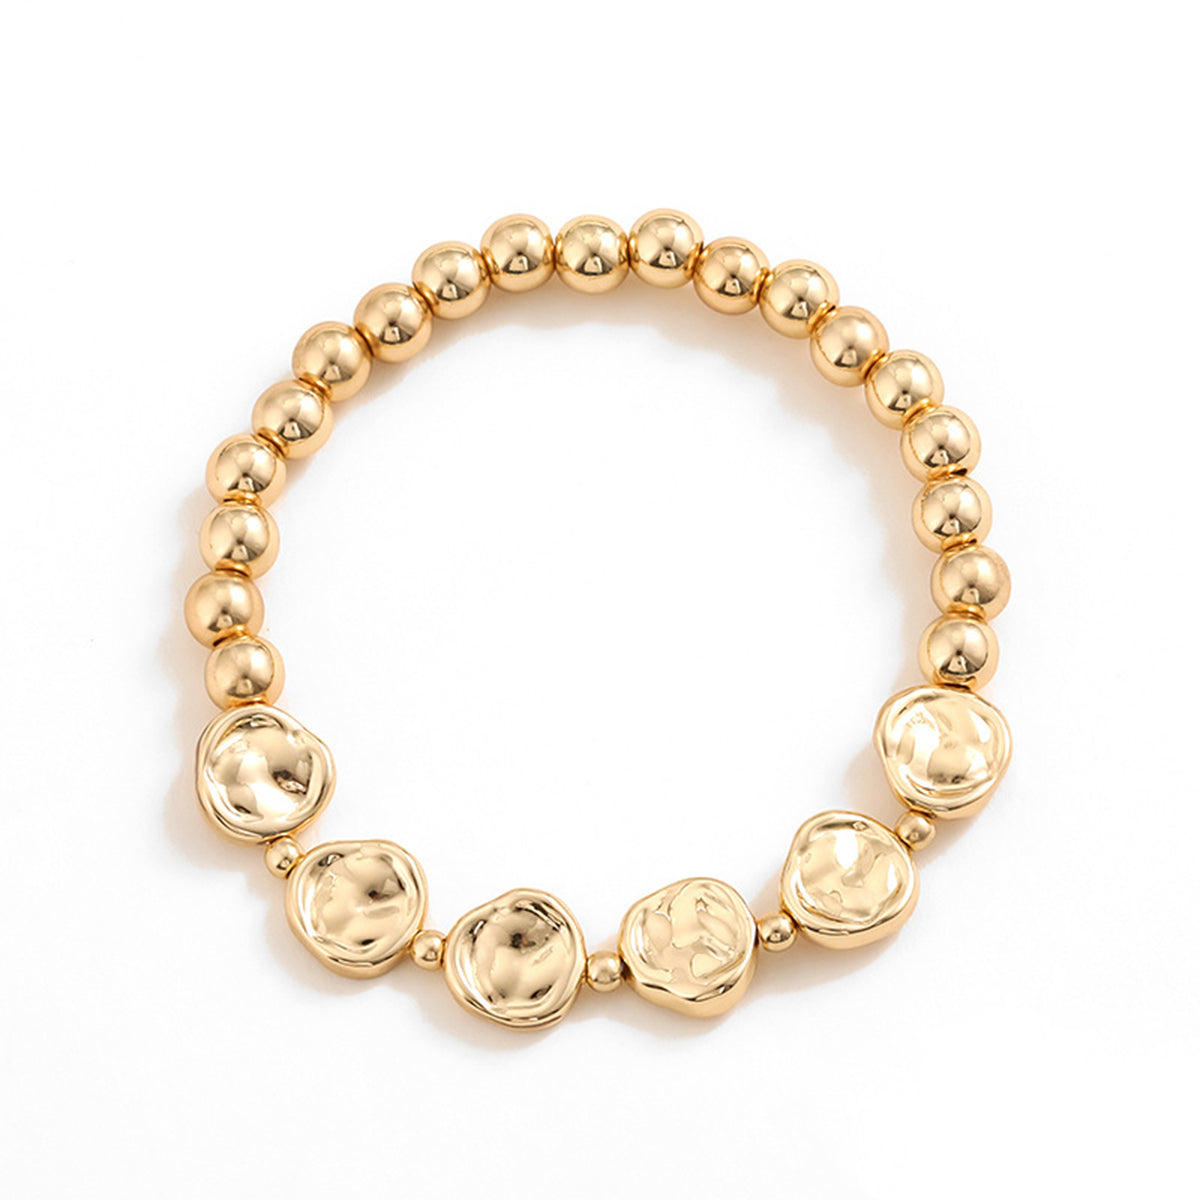 Gold-Plated Alloy Bead Bracelet Style C One Size